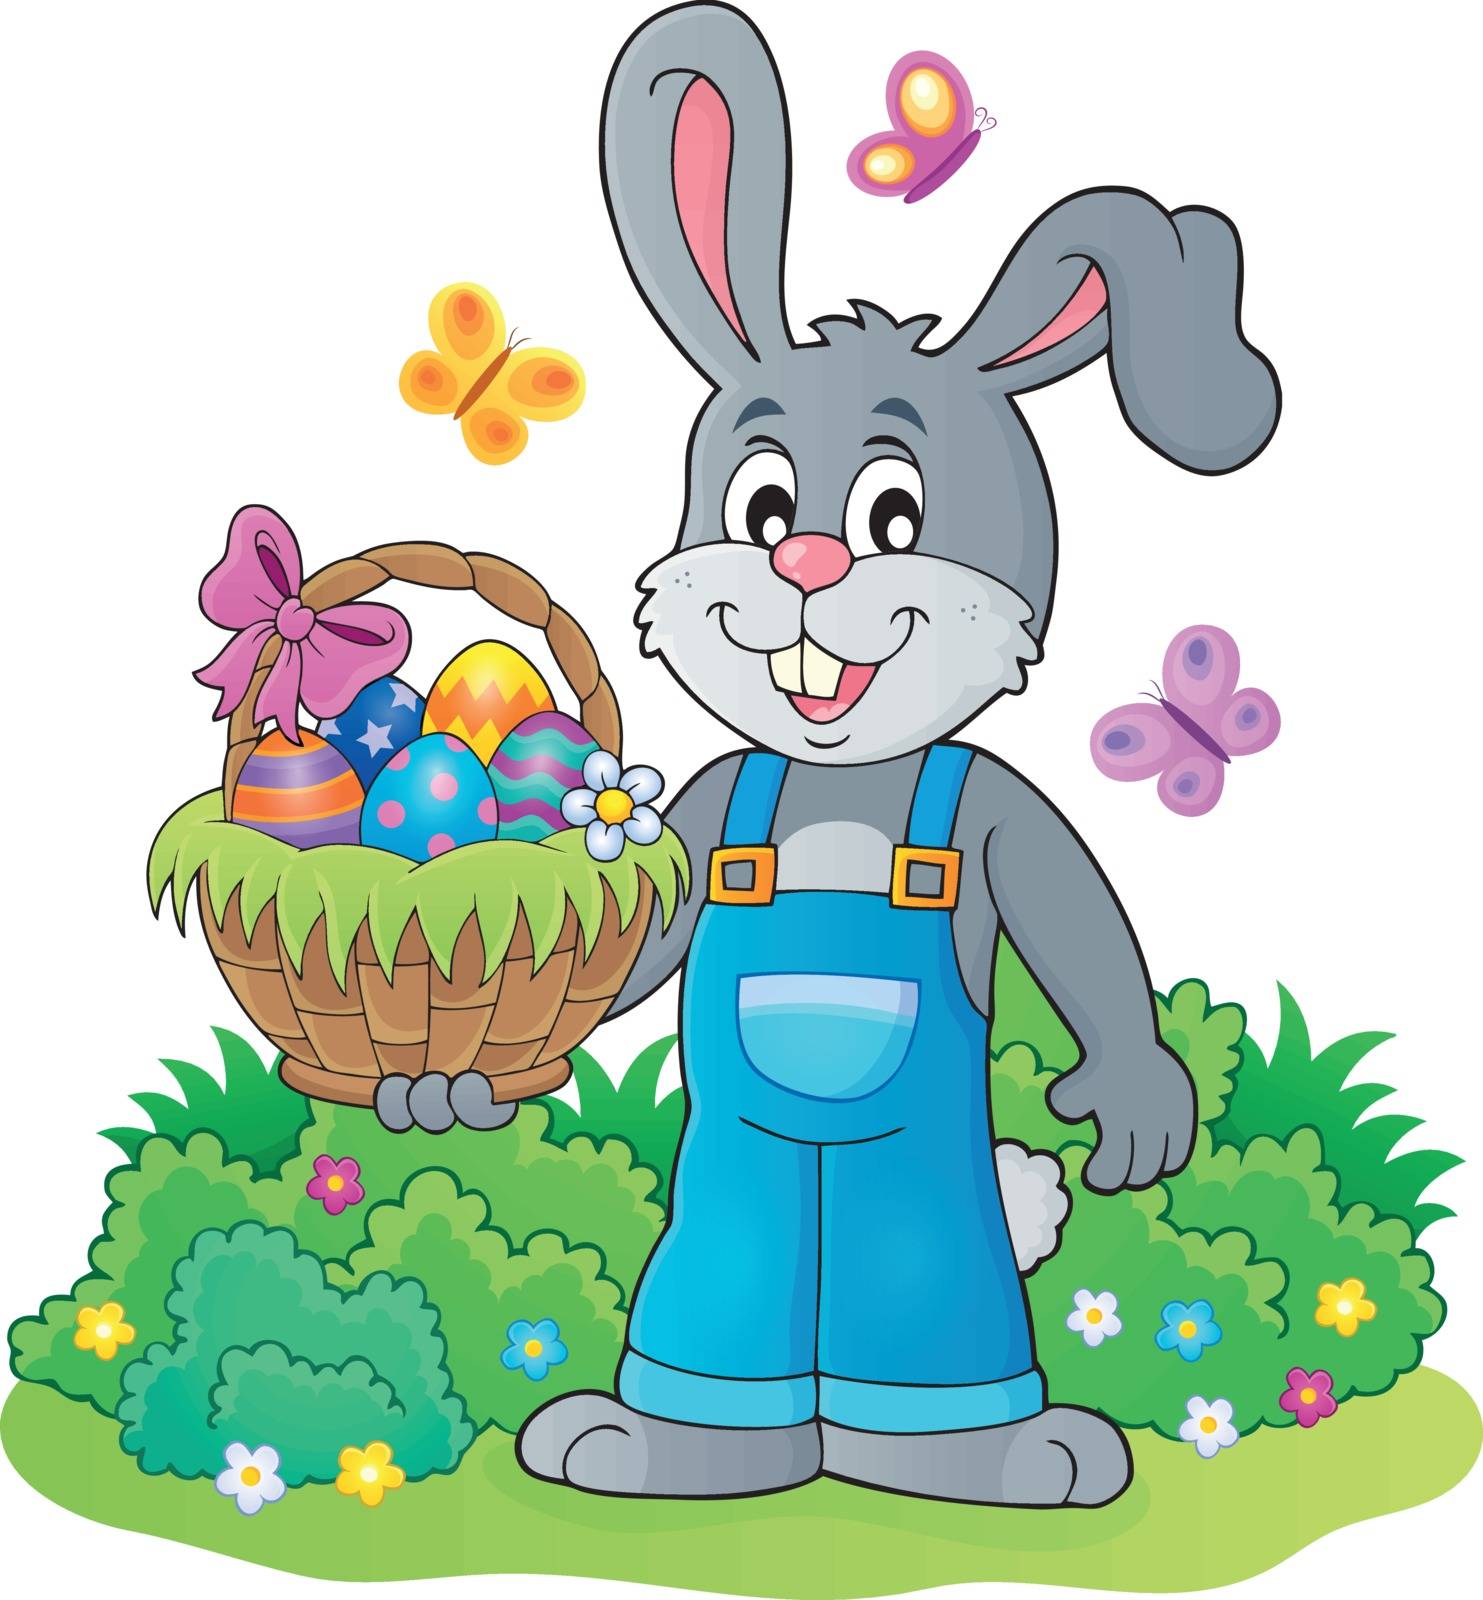 Bunny holding Easter basket theme 4 by clairev